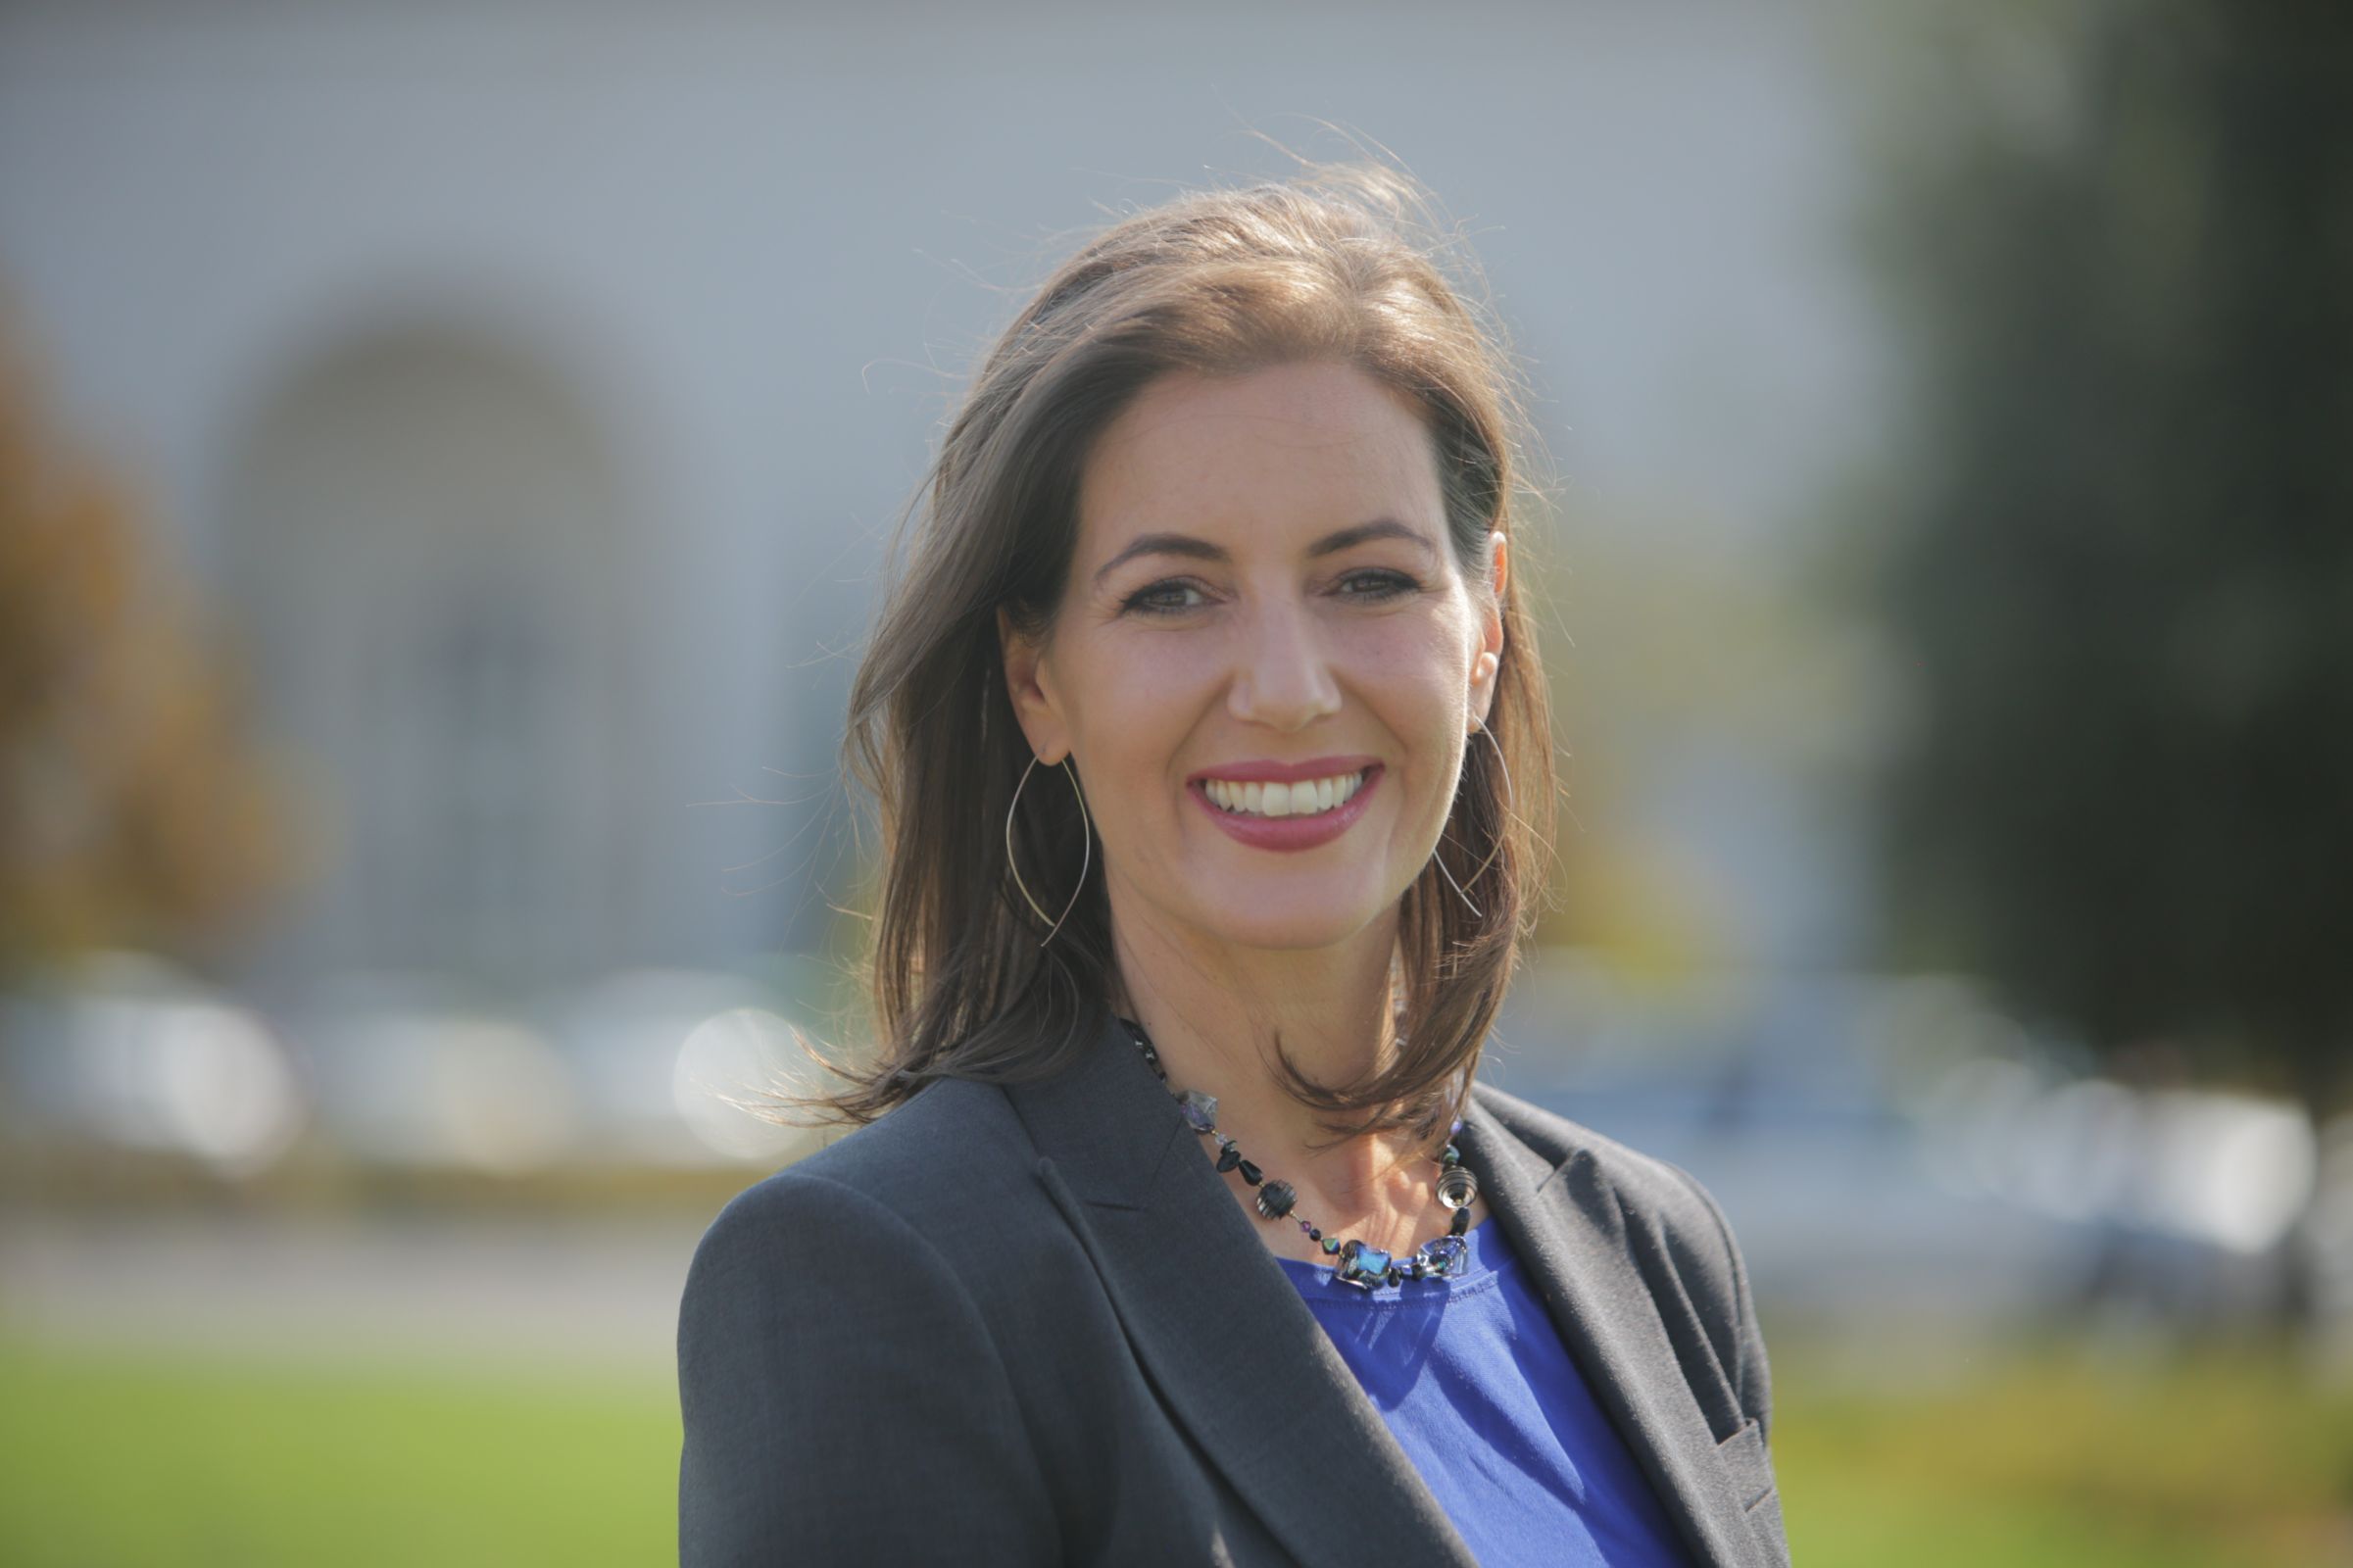 Oakland Mayor Libby Schaaf to highlight importance of public-sector leadership at 2022 Greater Portland Economic Summit Photo